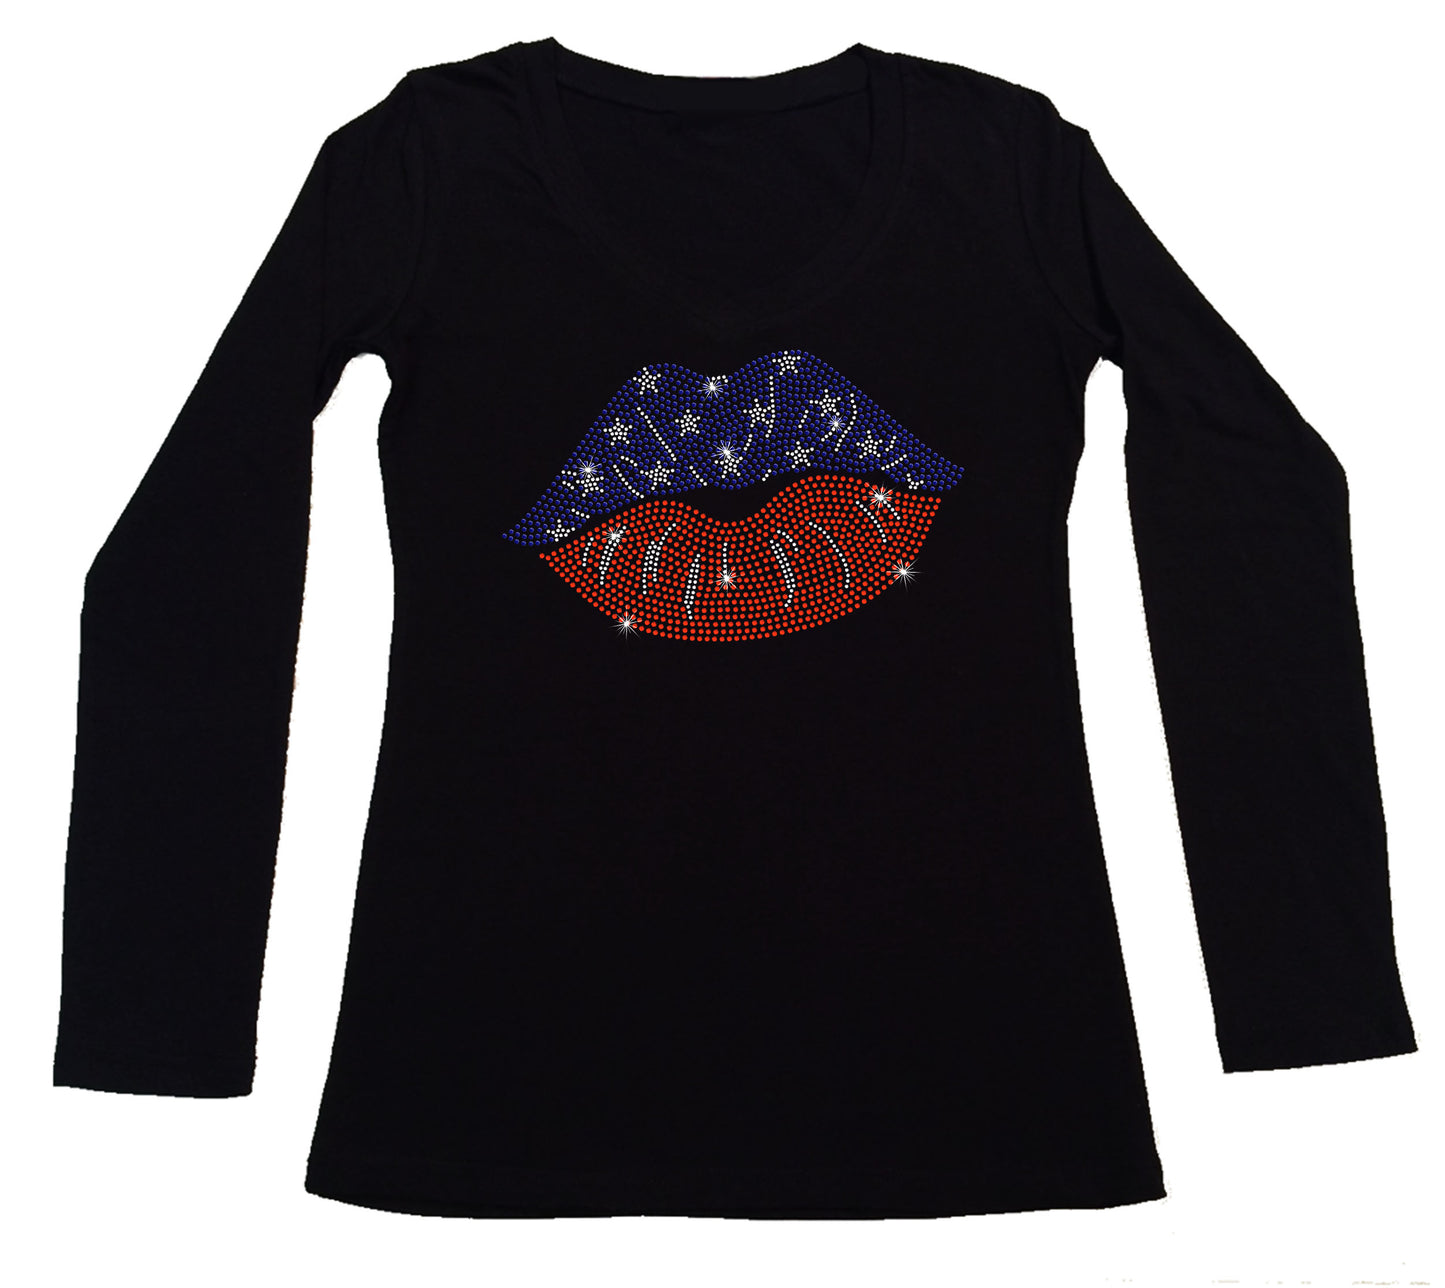 Women's Rhinestone Fitted Tight Snug 4th of July Lips - in Red, White & Blue, Patriotic Shirt, 4th of July Shirt